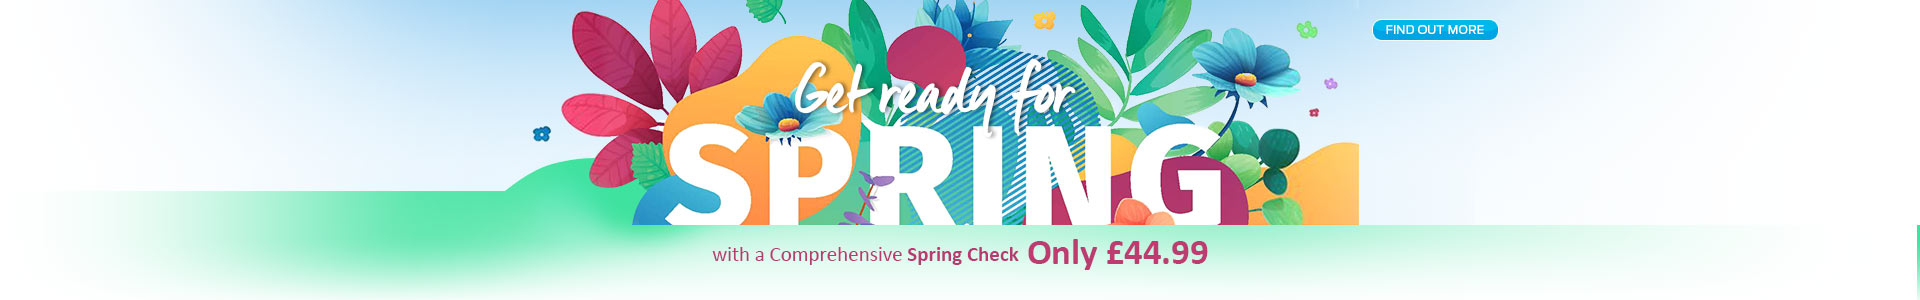 Get ready to enjoy Spring with a Busseys Spring Check